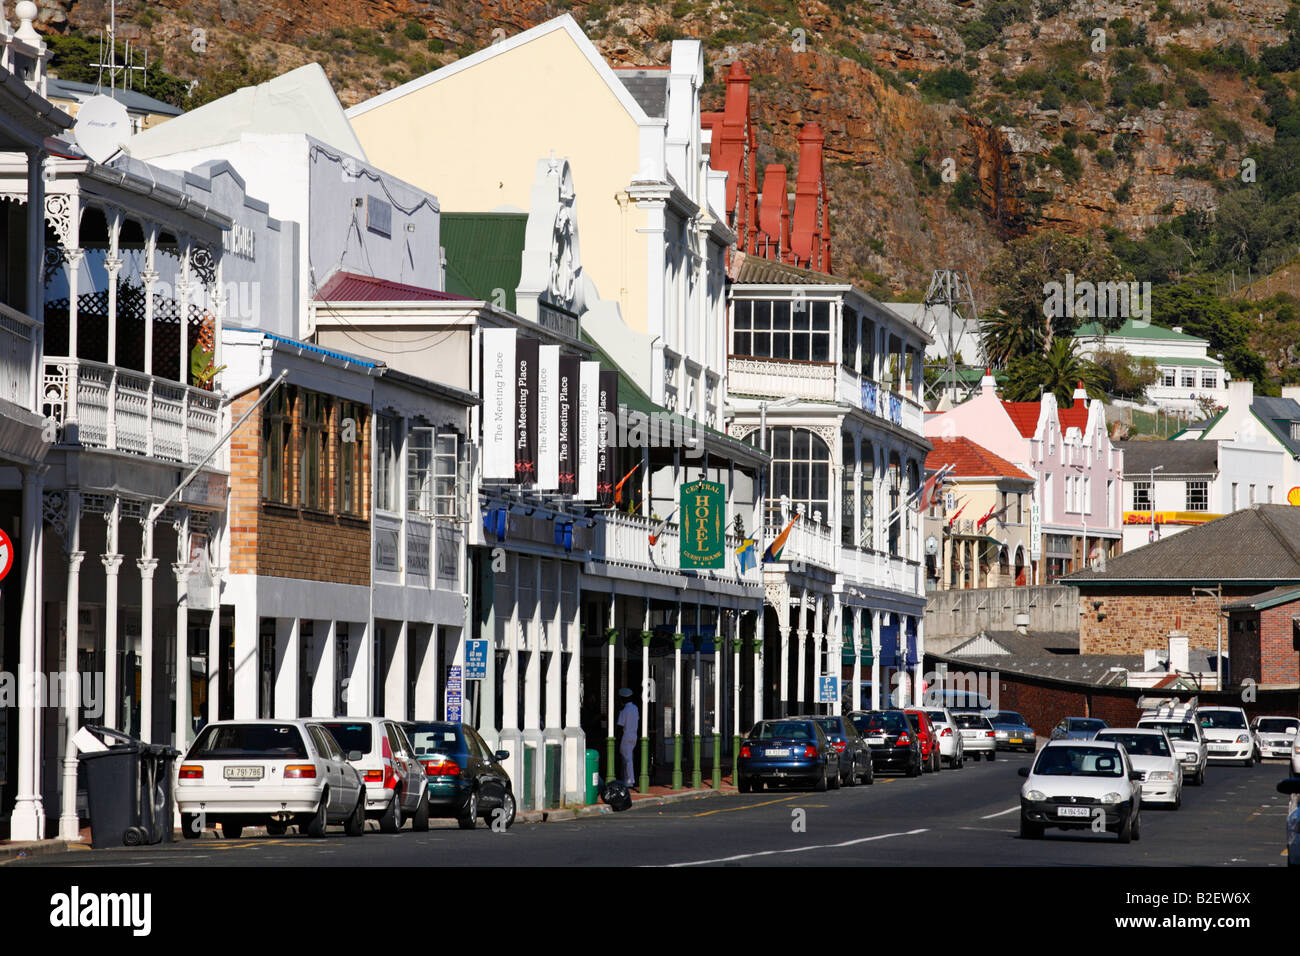 Simonstown street scene showing relics of colonial architecture. Stock Photo